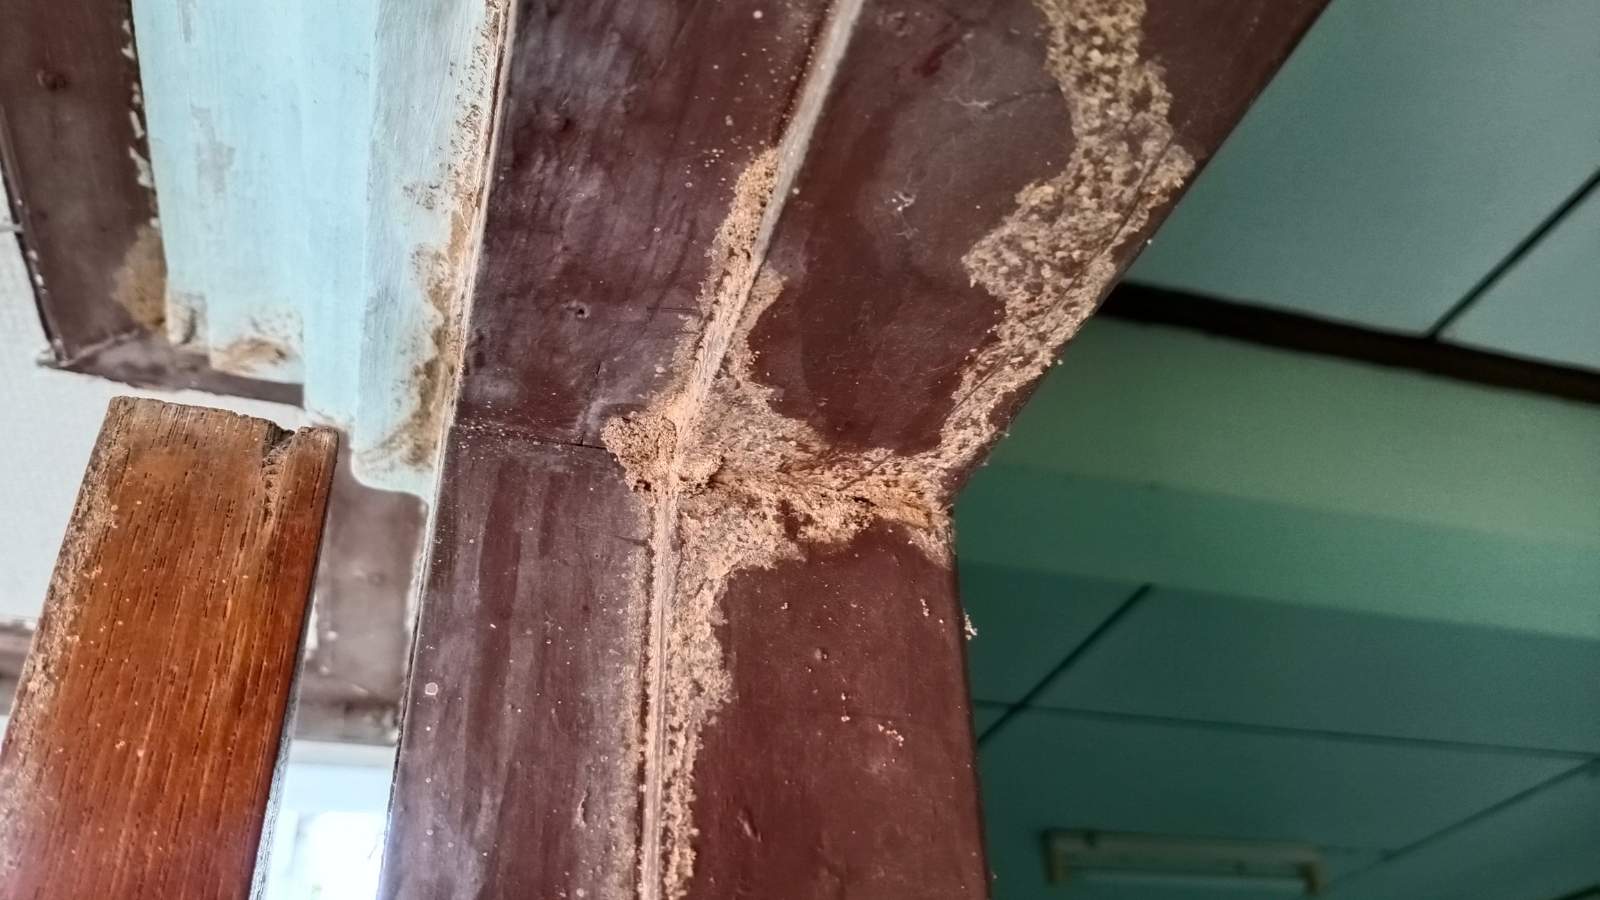 Signs of termites